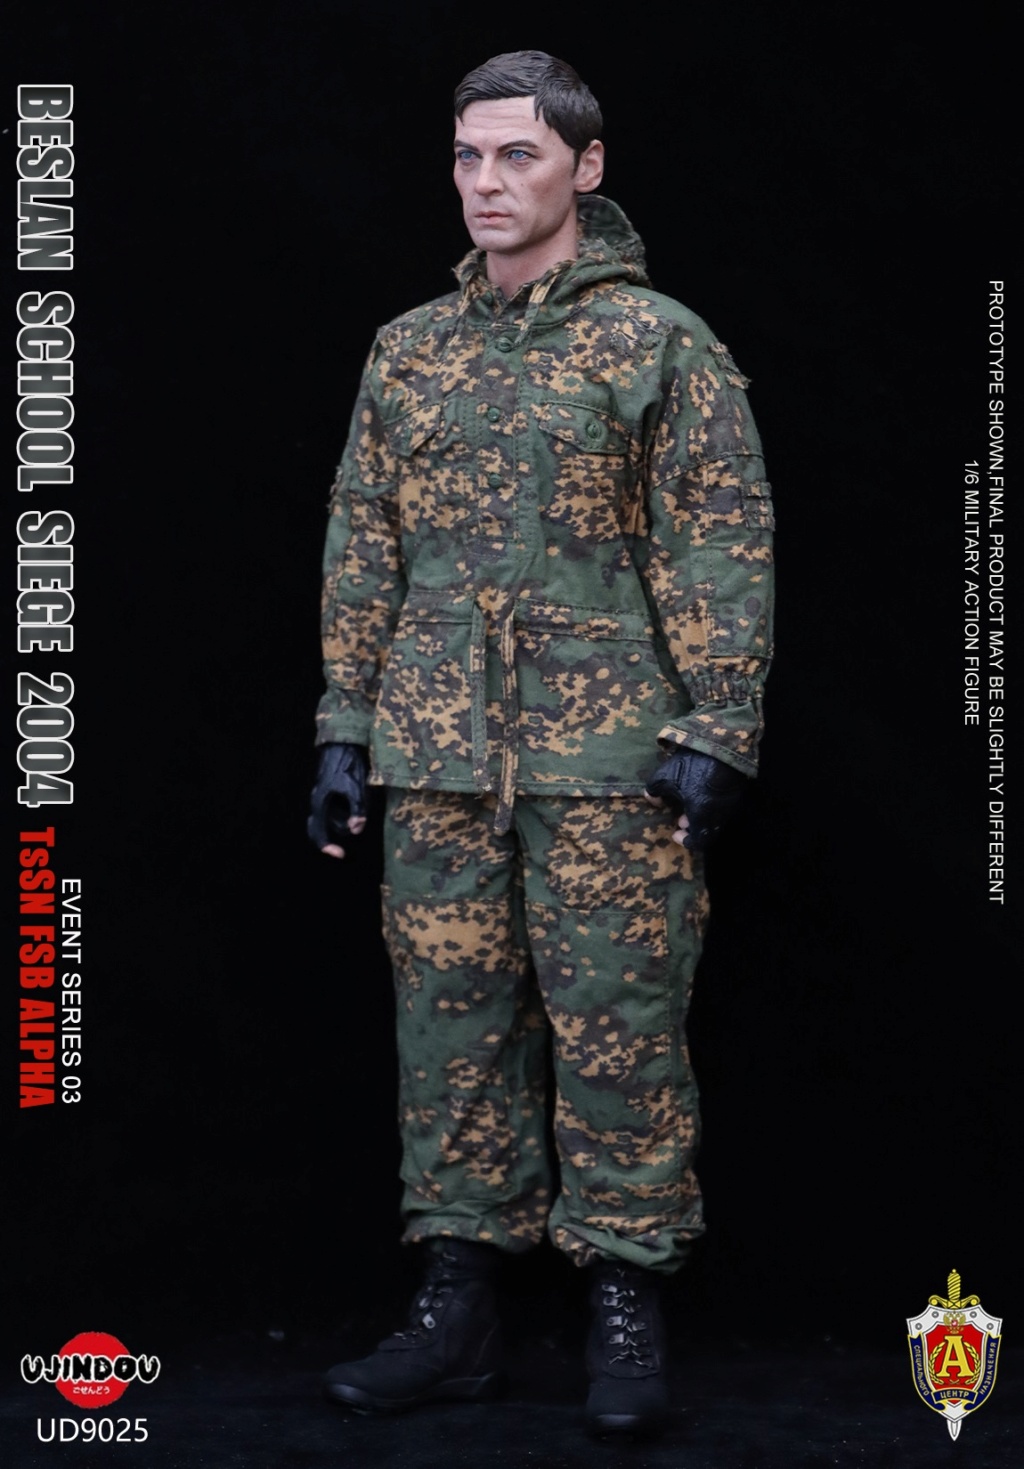 BeslanIncident2004 - NEW PRODUCT: UJINDOU: 1/6 FSB Special Forces of the Russian Federal Security Service - Beslan Incident 2004 #UD9025 11141510